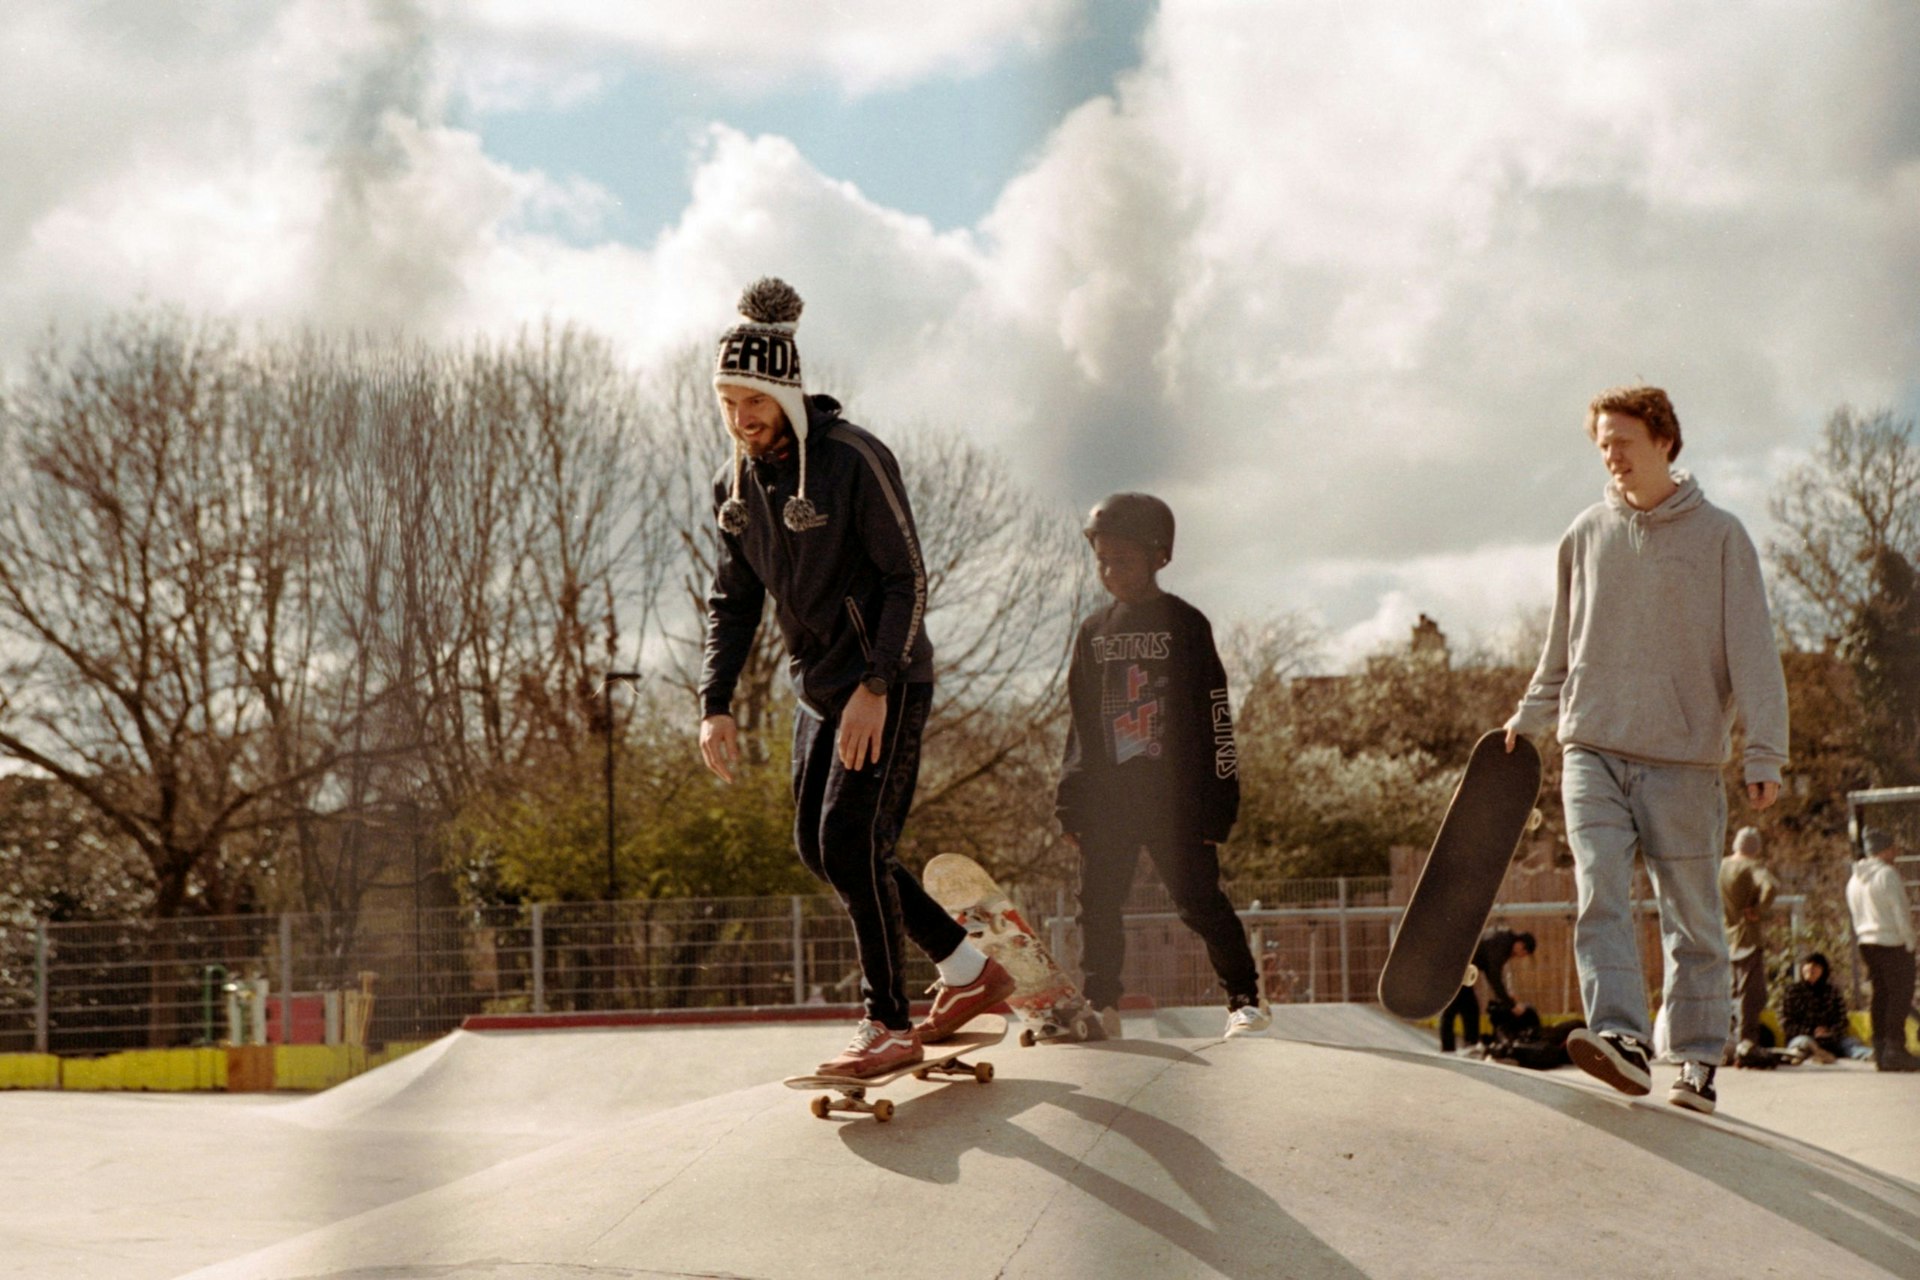 The concrete haven where skateboarding is just the start